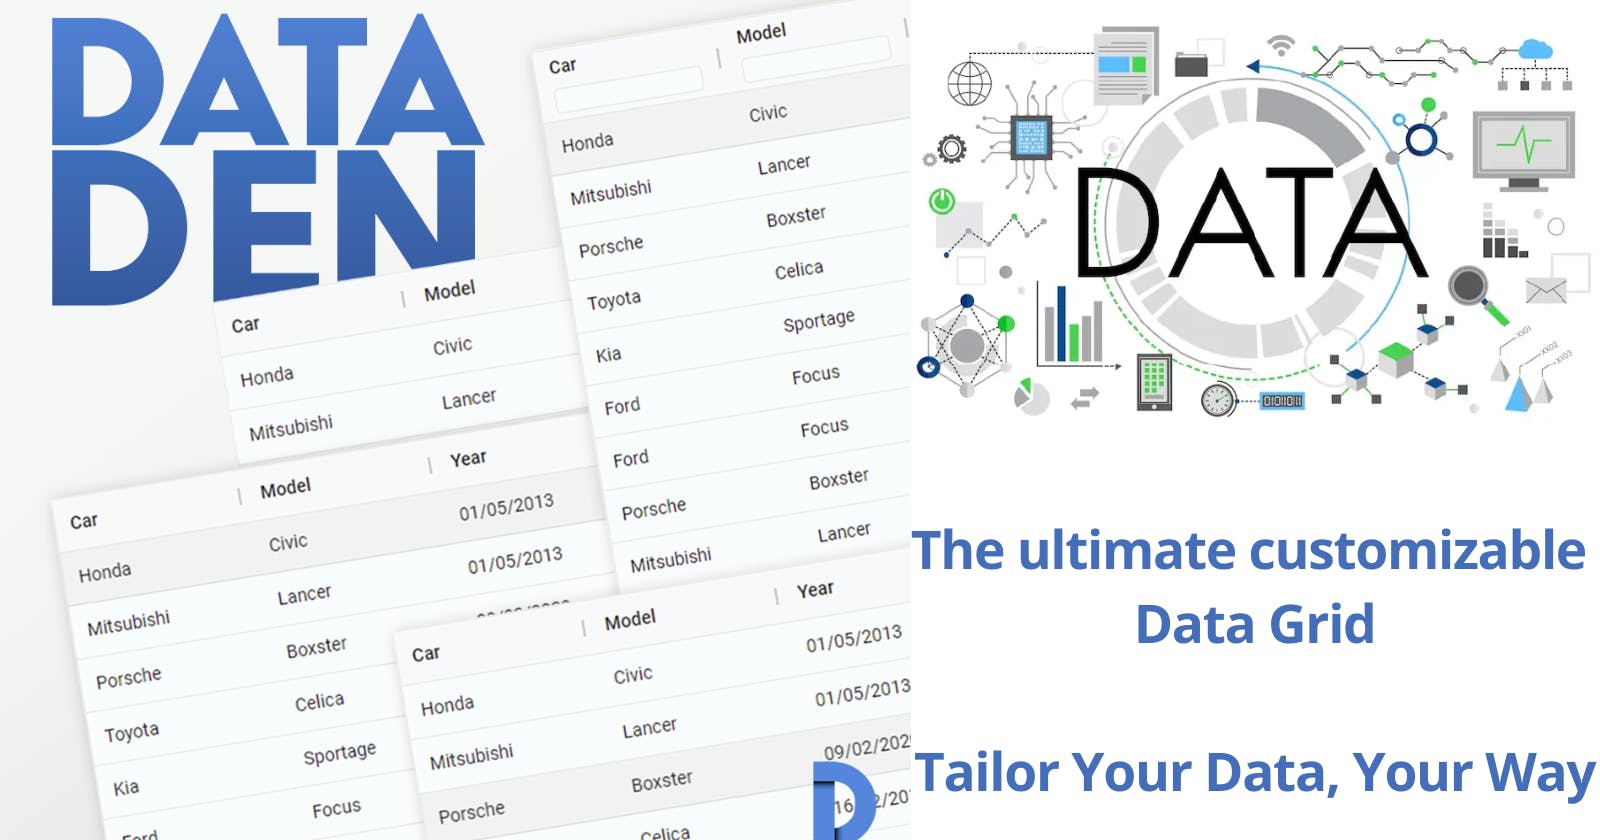 The ultimate customizable Data Grid